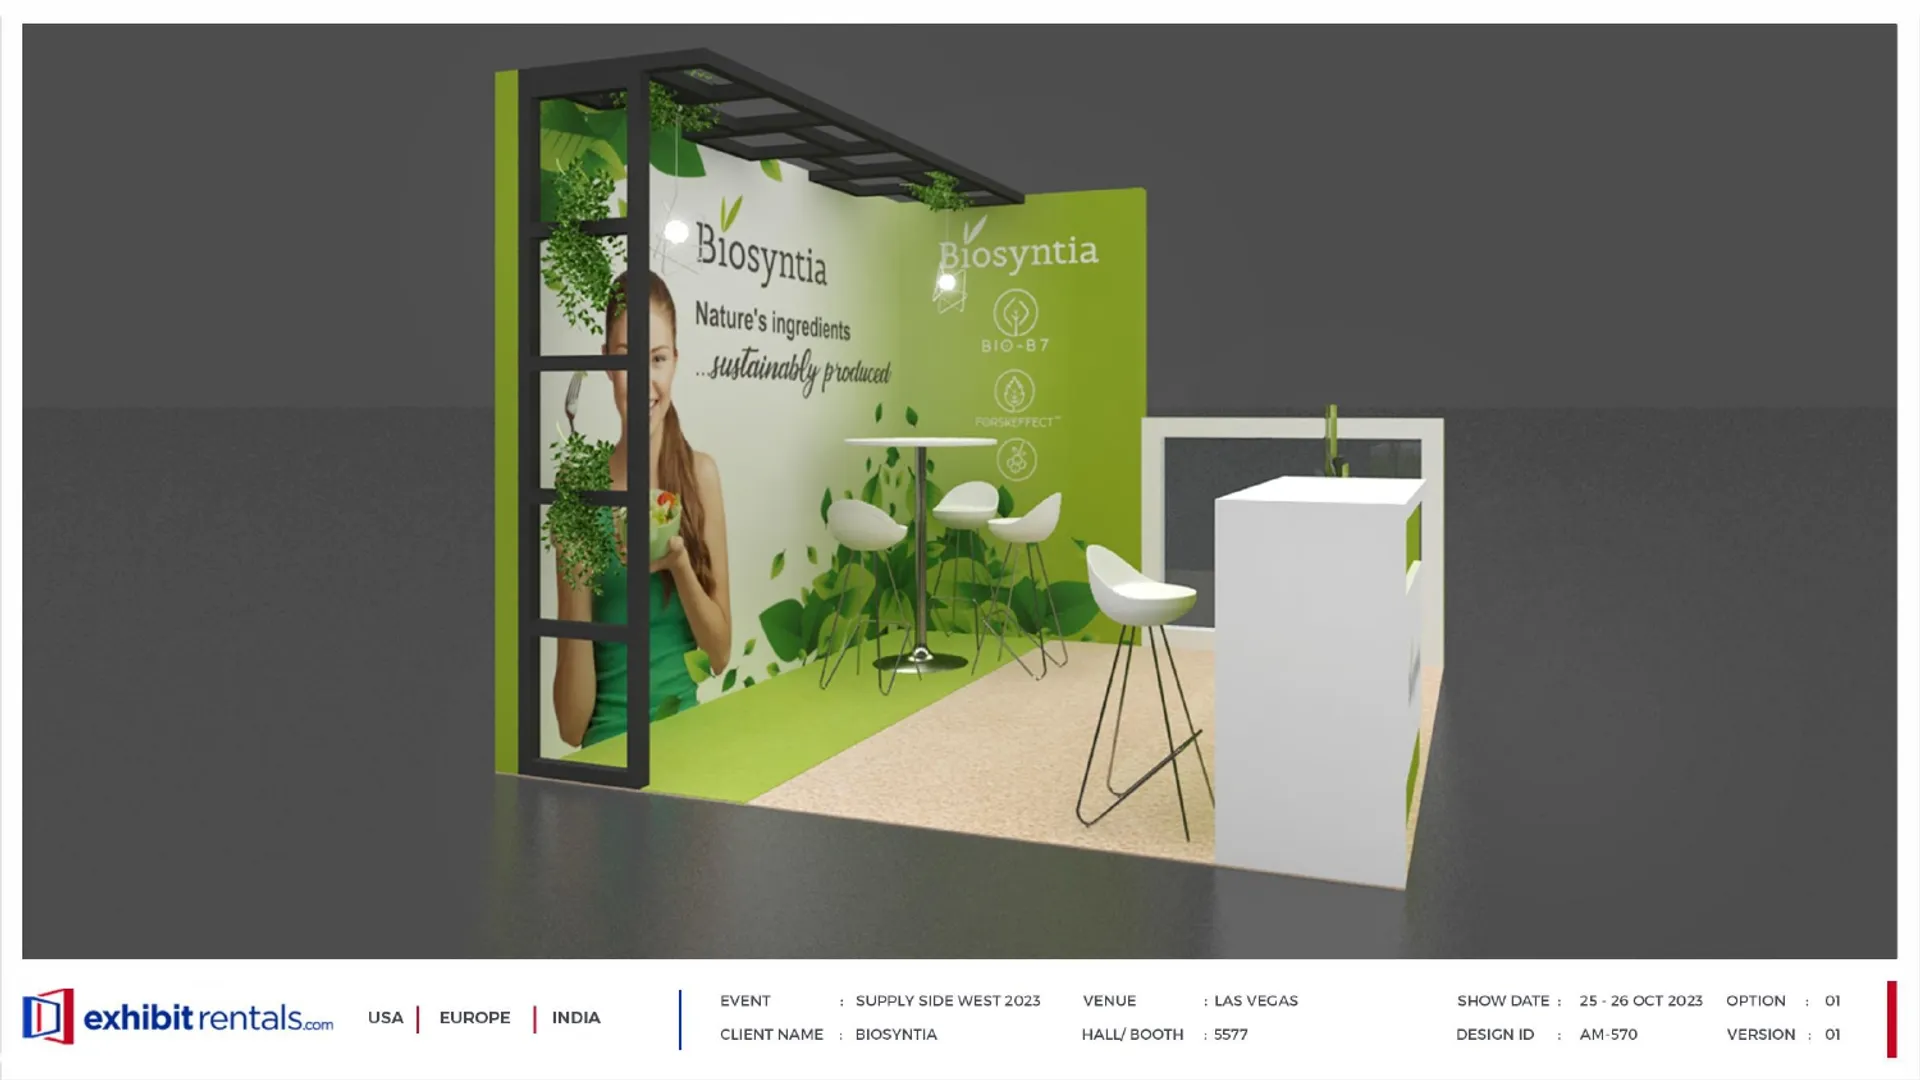 booth-design-projects/Exhibit-Rentals/2024-04-18-10x10-PERIMETER-Project-91/1.1_Biosyntia_Supply Side West 2023_ER Design presentation-16_page-0001-sv22s.jpg